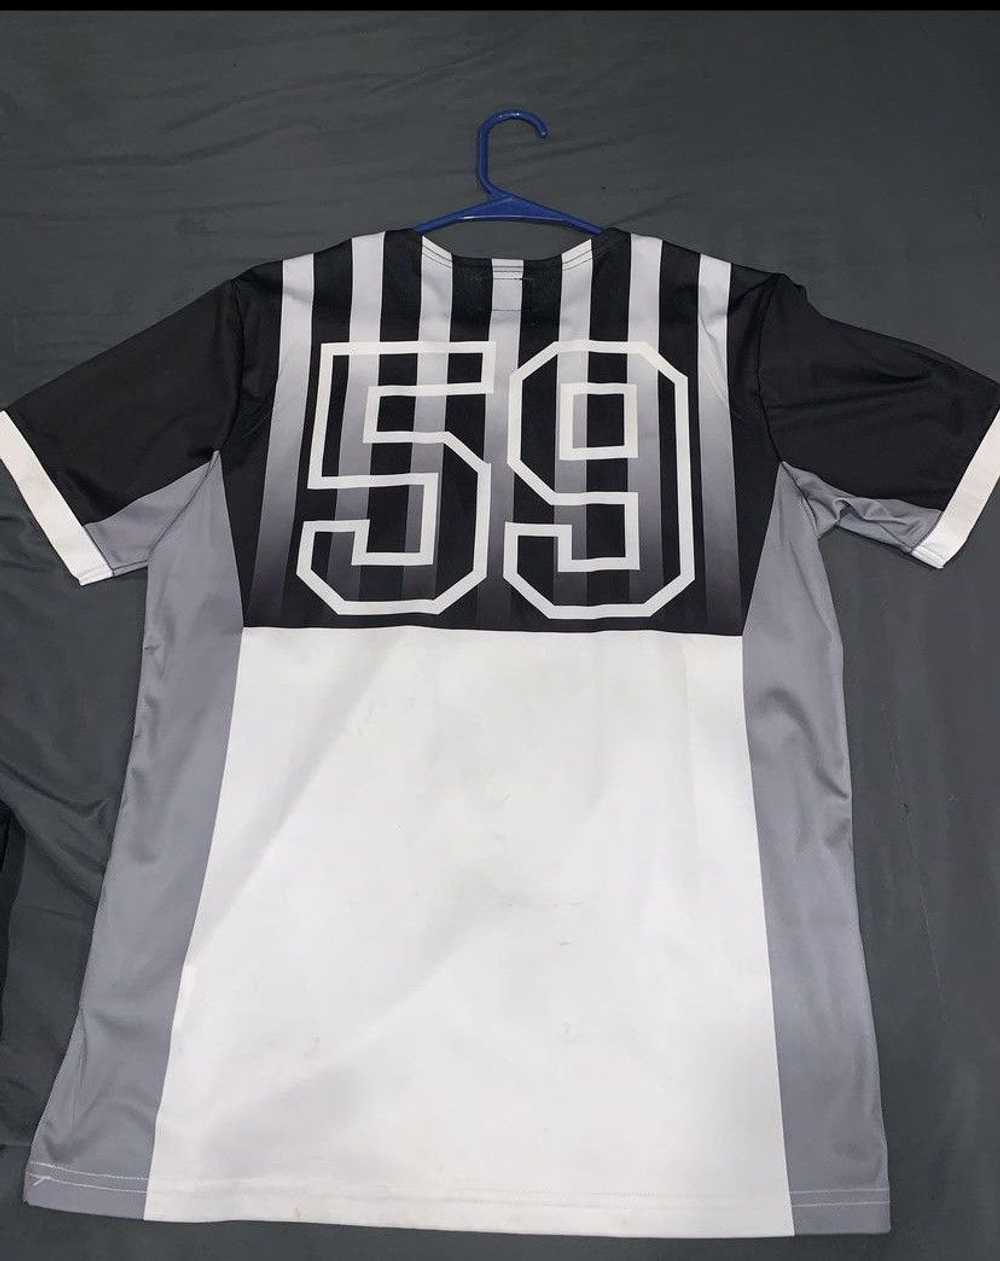 G59 Records G59 soccer jersey - image 3